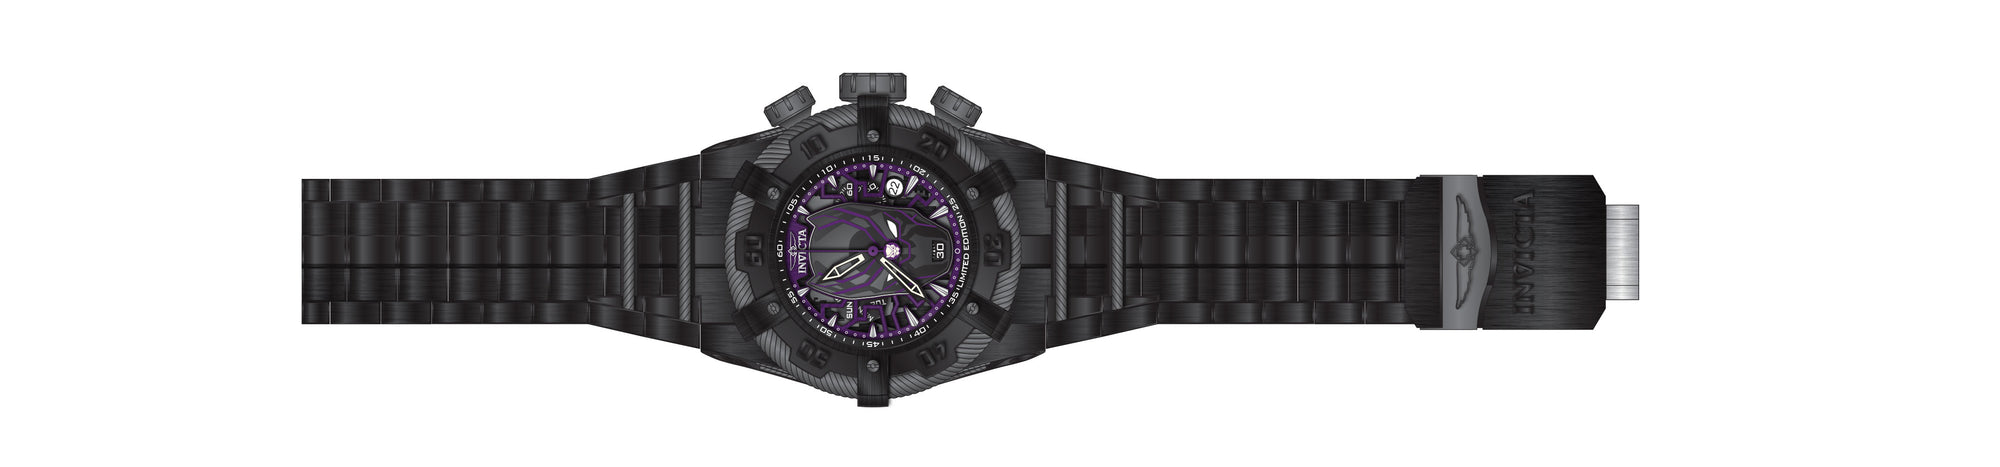 Band For Invicta Marvel 35166